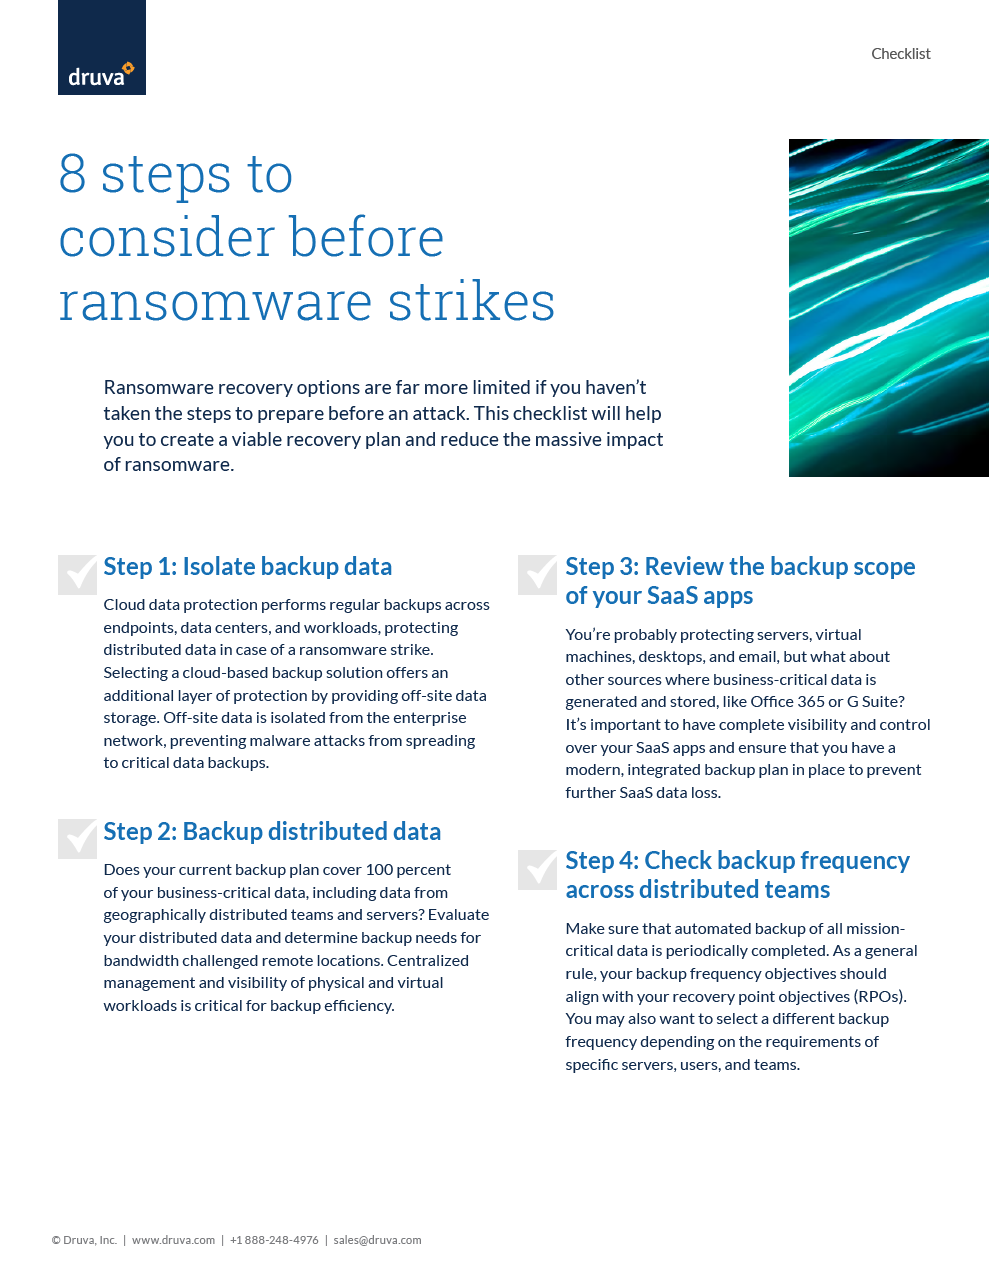 8 steps to consider before ransomware strikes